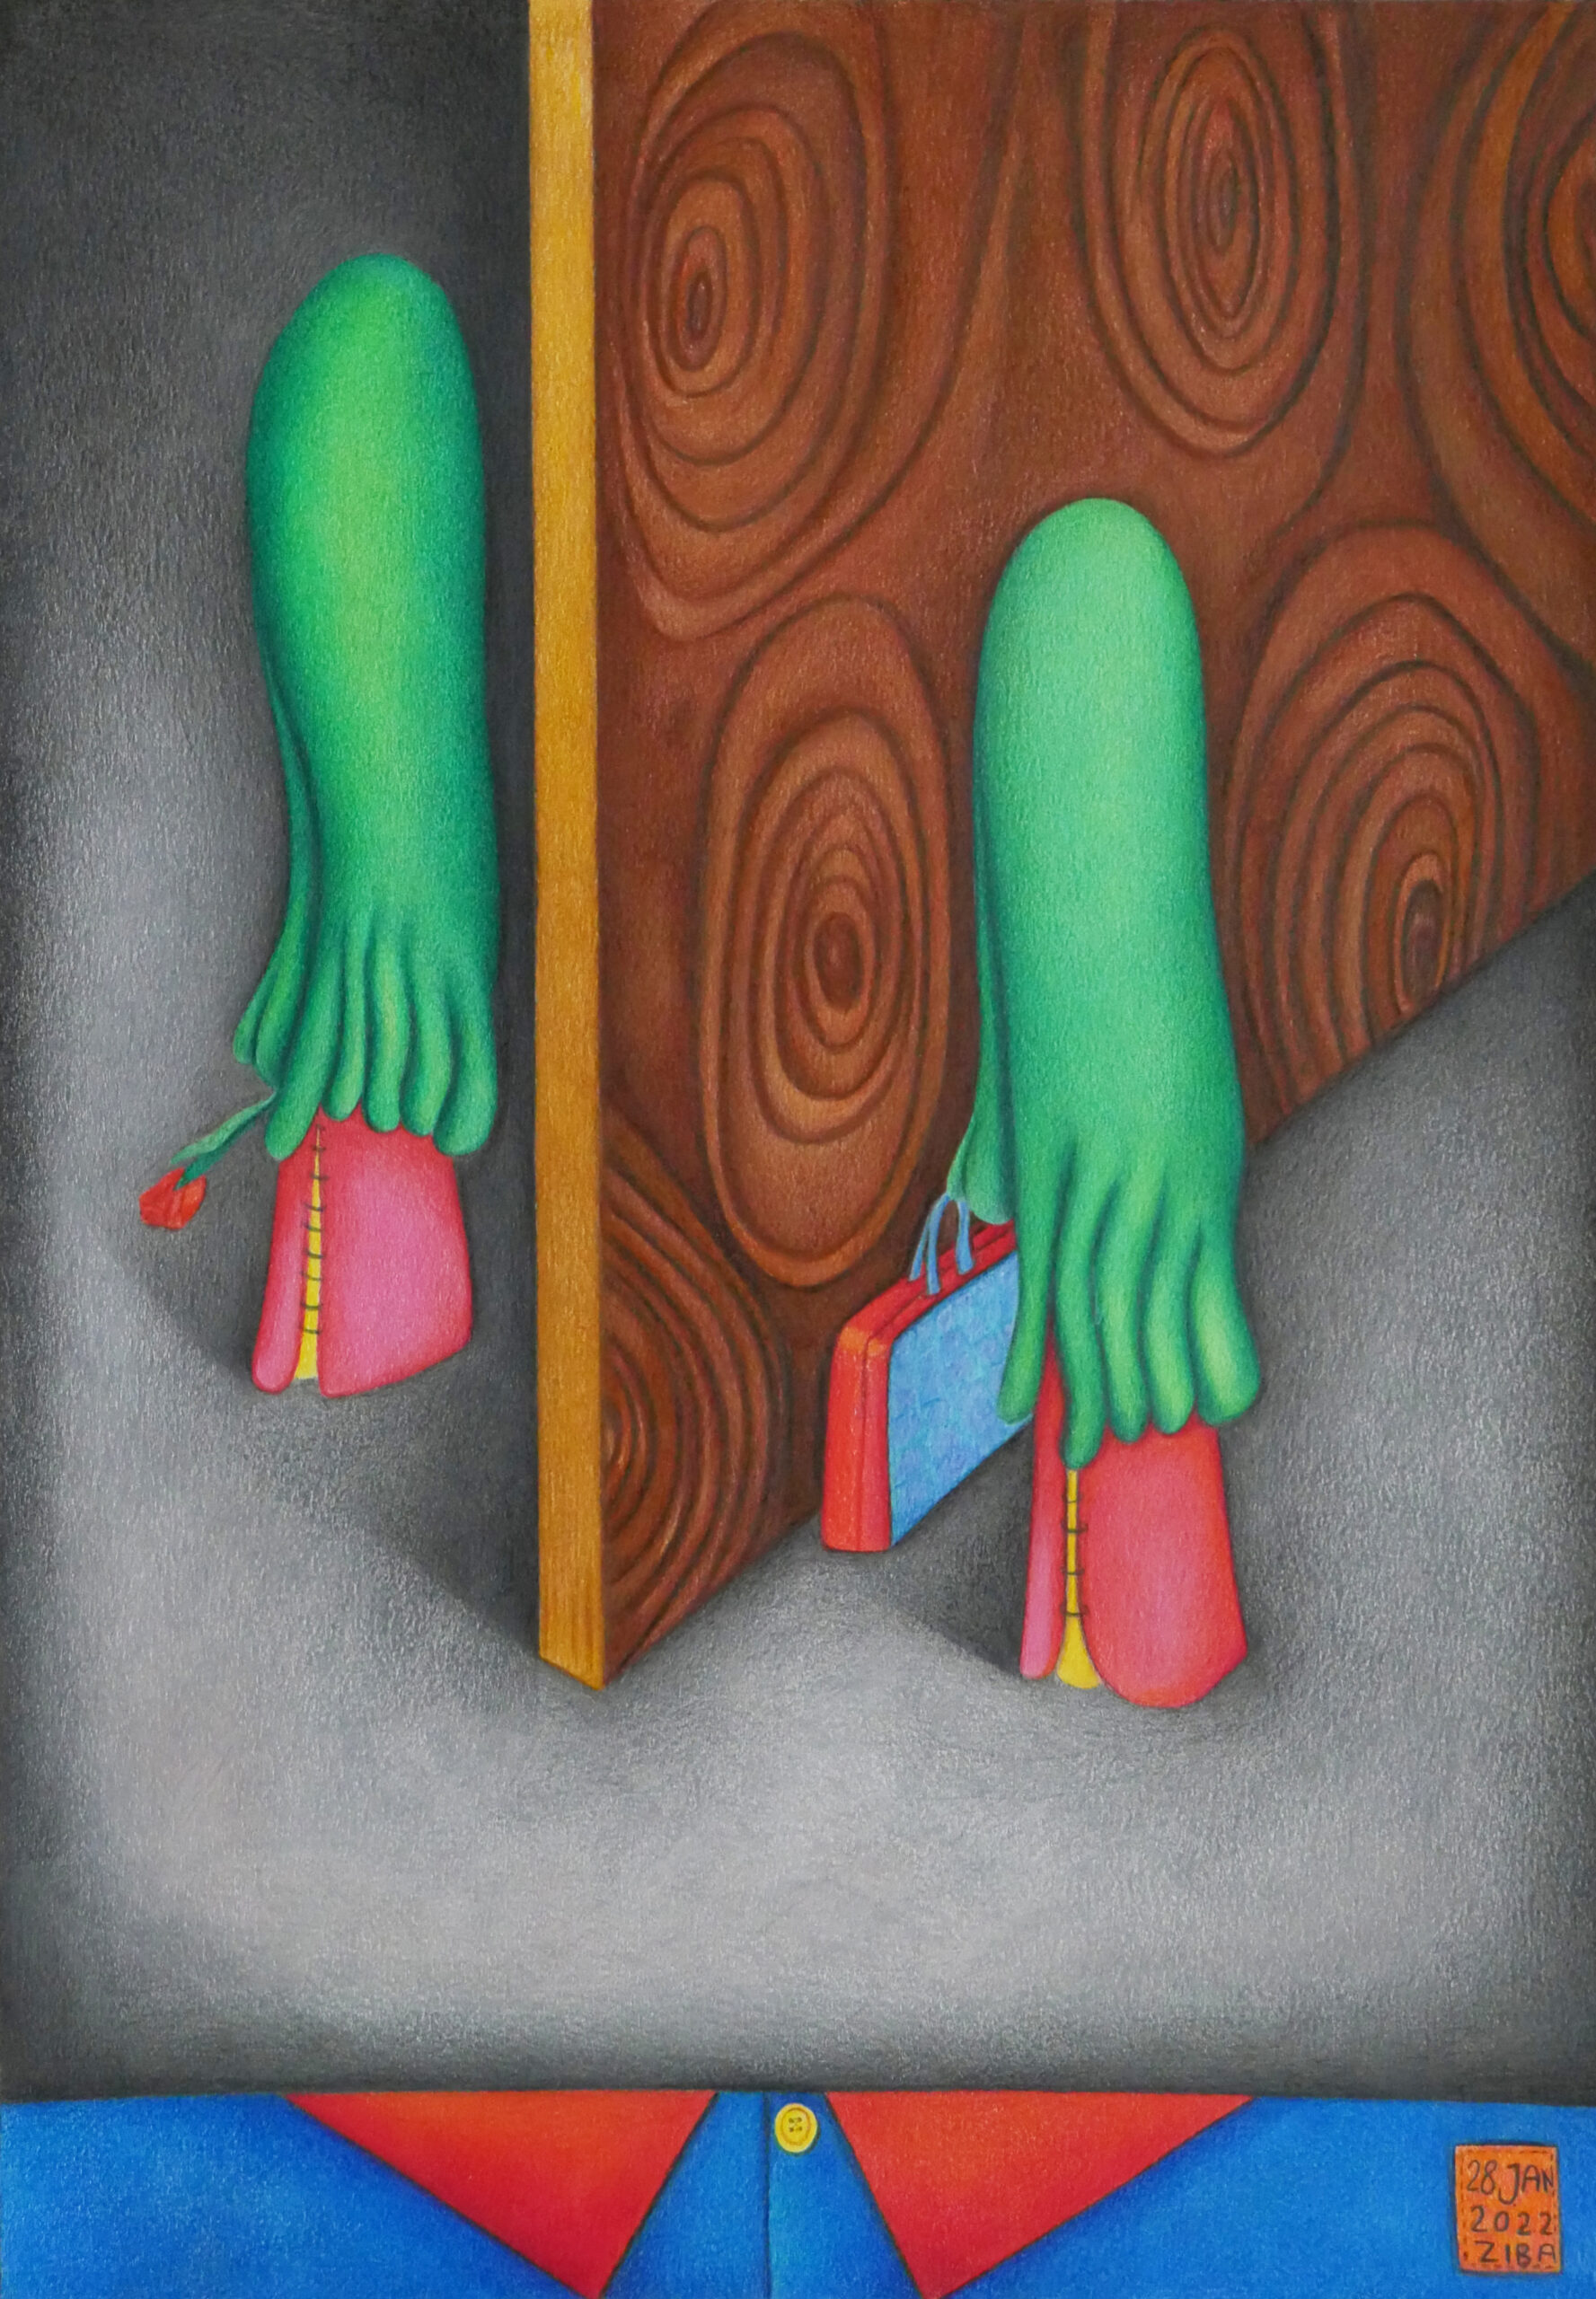 A Hidden Wholeness | 49.0 x 35.6 cm | Colored Pencil on Cardboard | 2022 